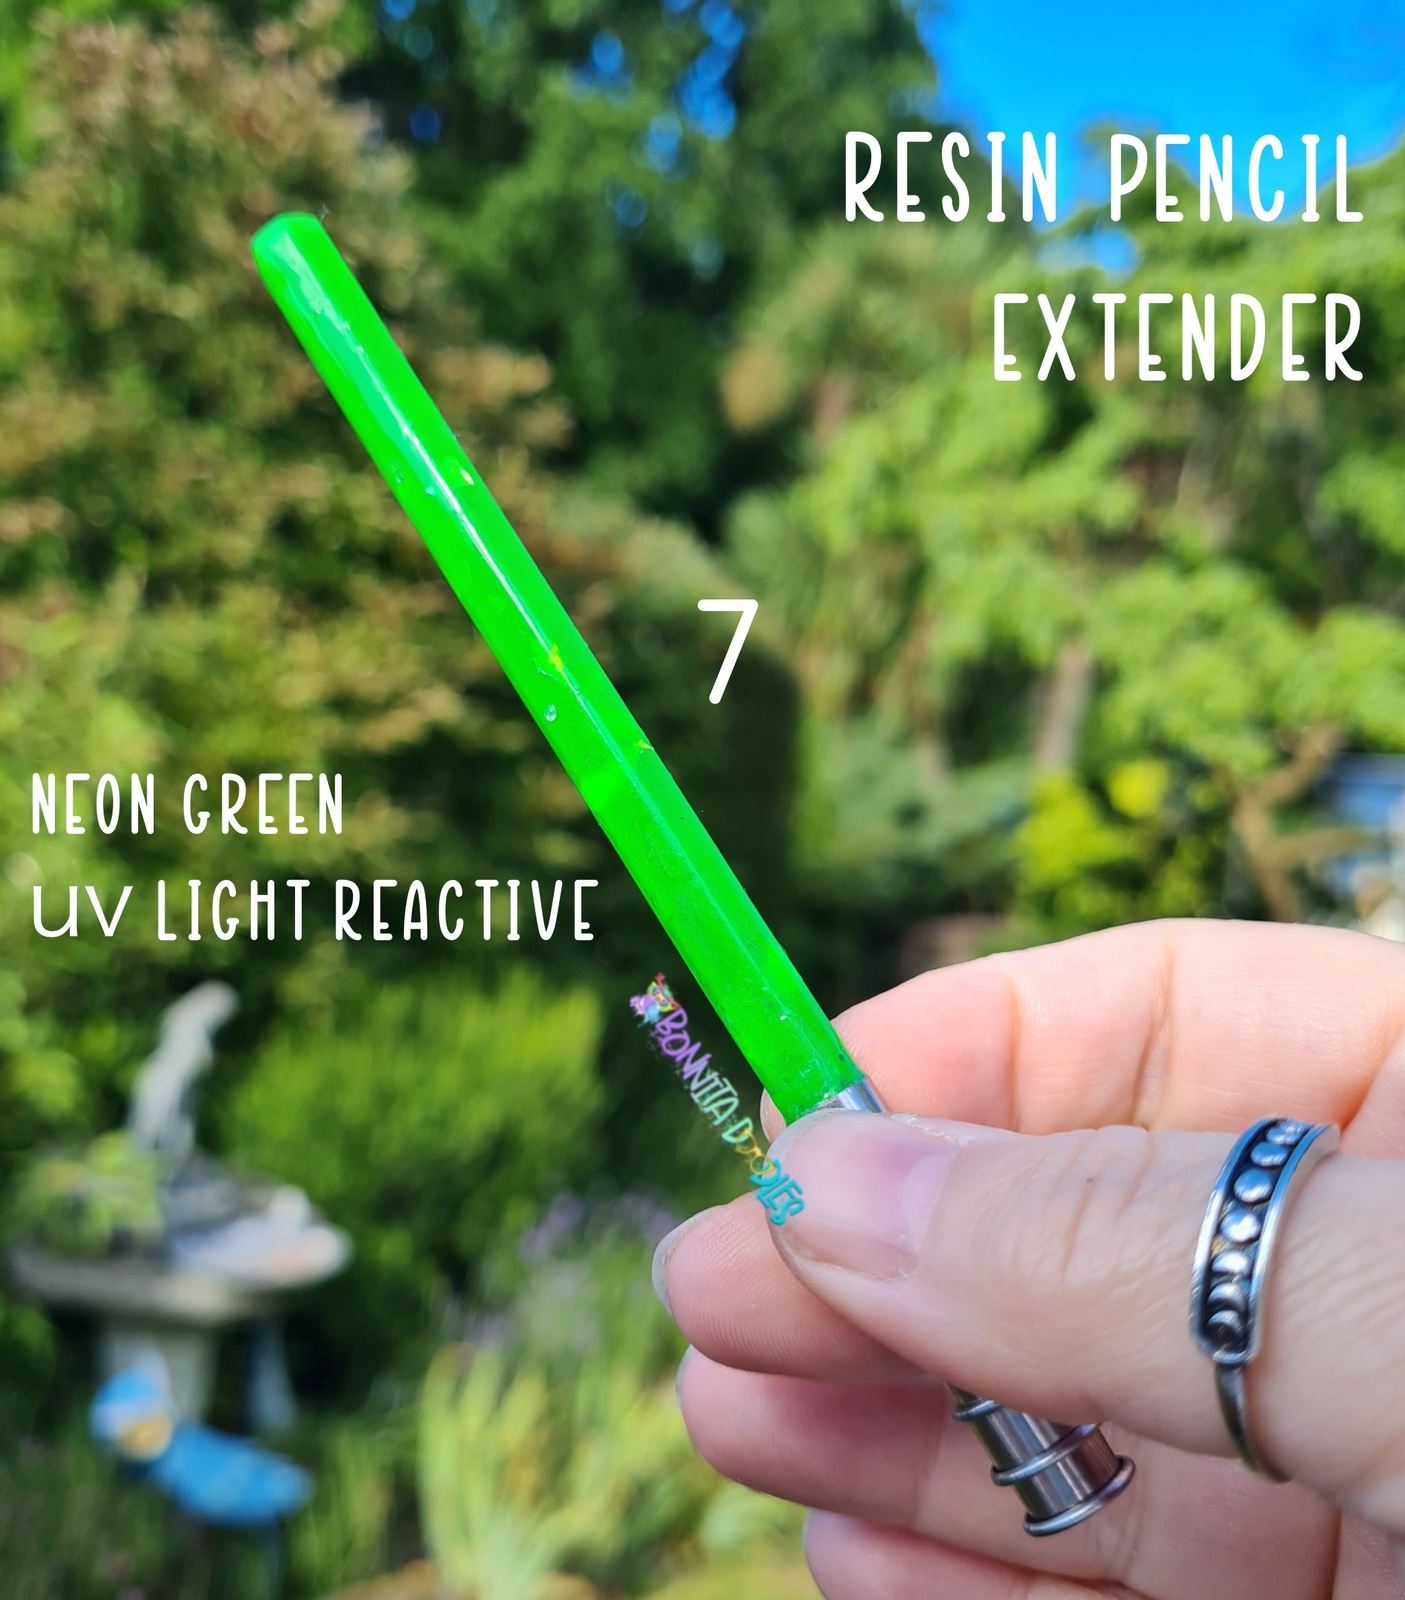 Resin pencil extender, handmade for artists, colourists and more